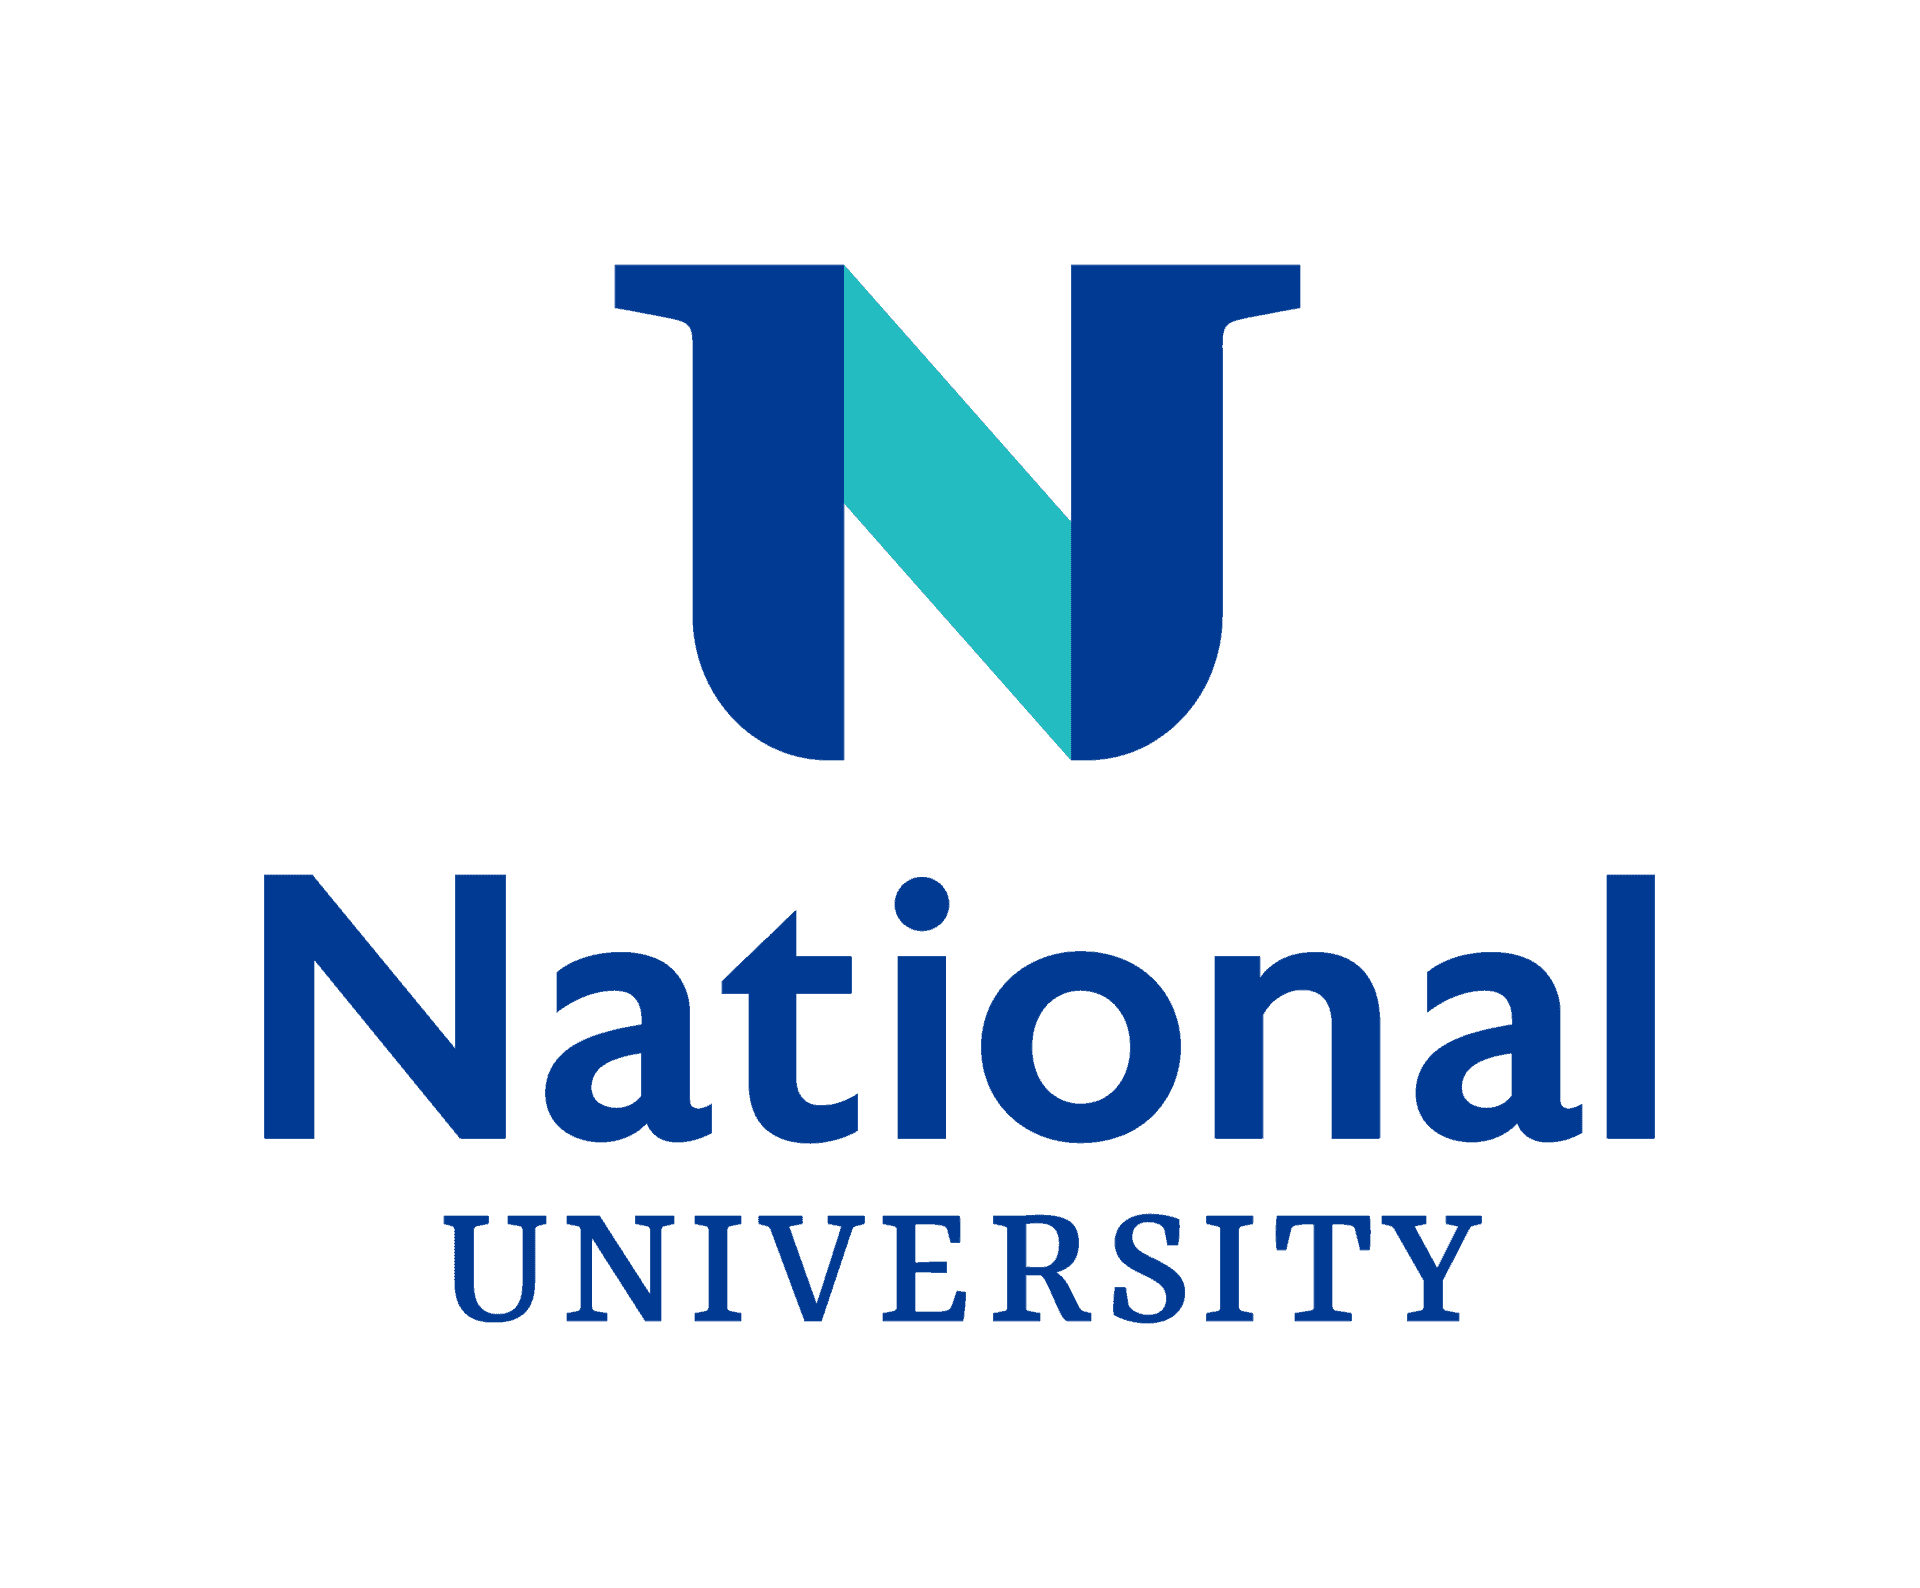 Member Welcome: National University